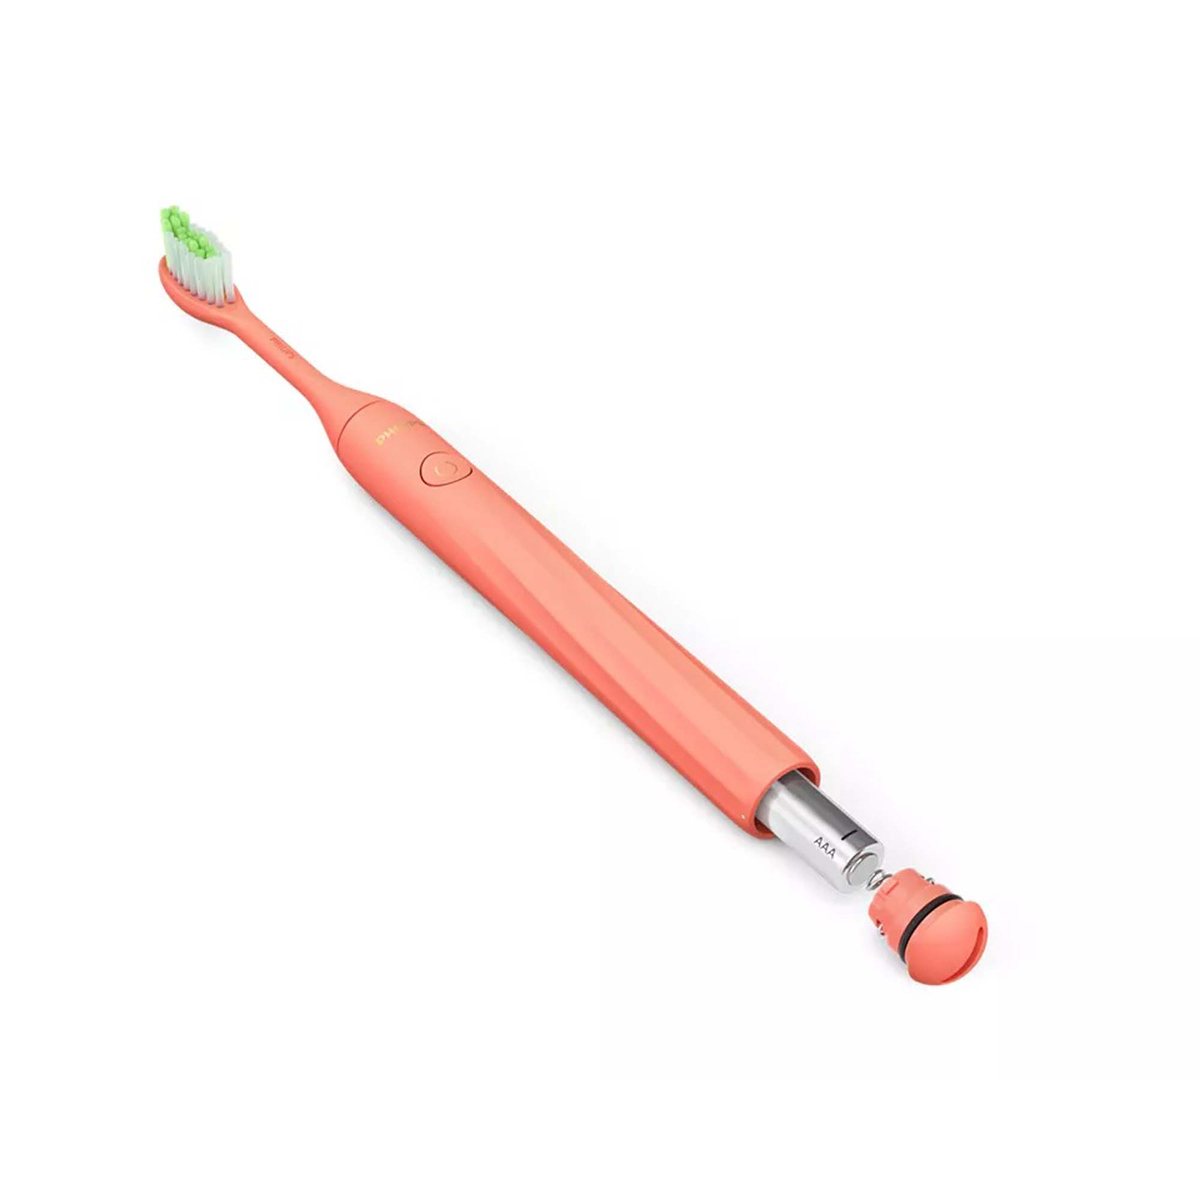 Philips One by Sonicare Battery Toothbrush Miami Coral HY1100/01 + 2 Philips One by Sonicare Brush head Miami Coral BH1022/01